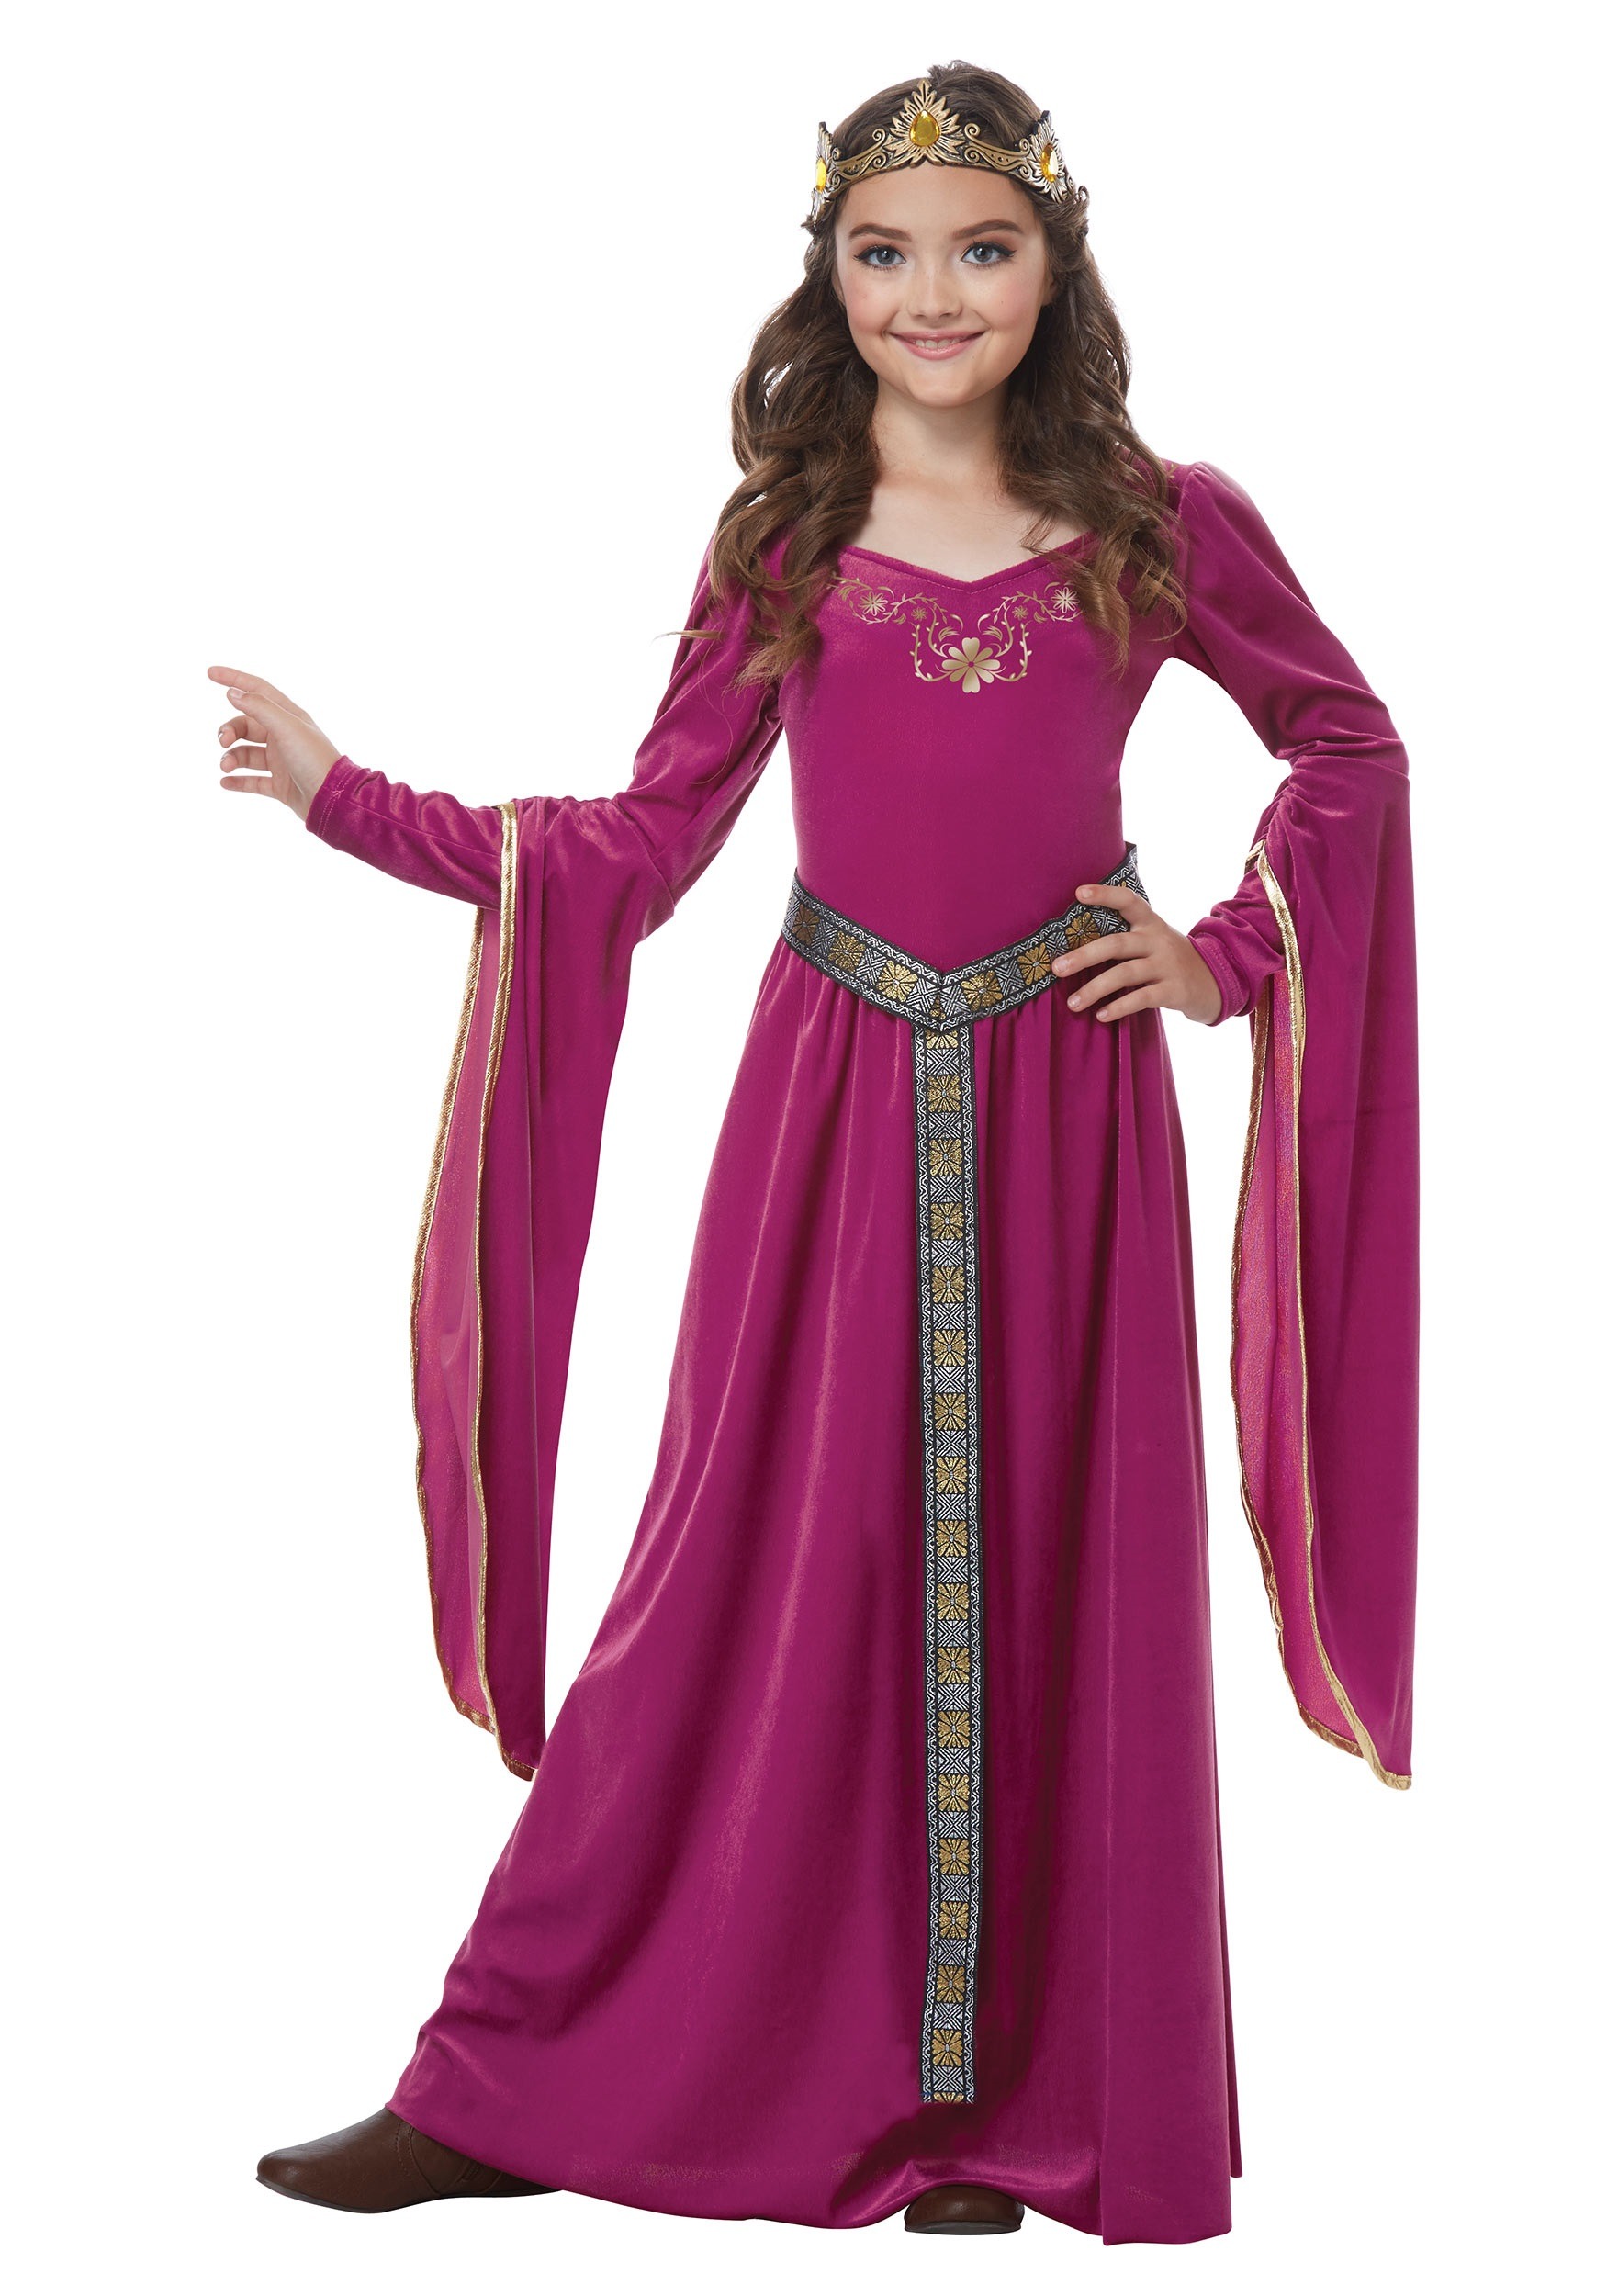 Medieval Princess Costume for Girls